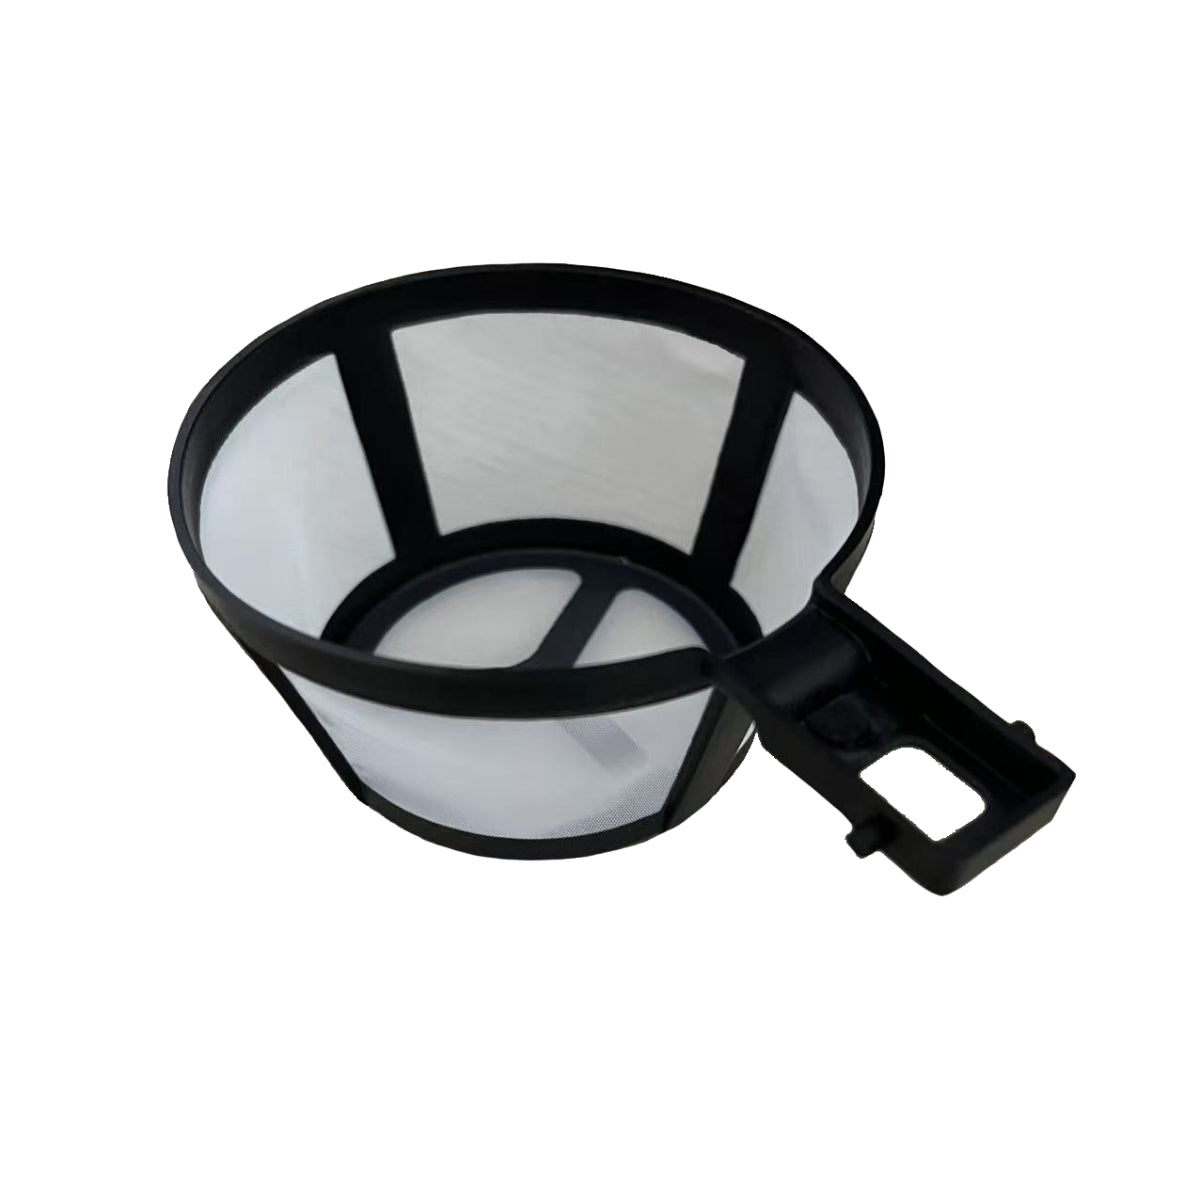 Single-Serve Reusable Coffee Filters - Kitchen - Easy Comforts